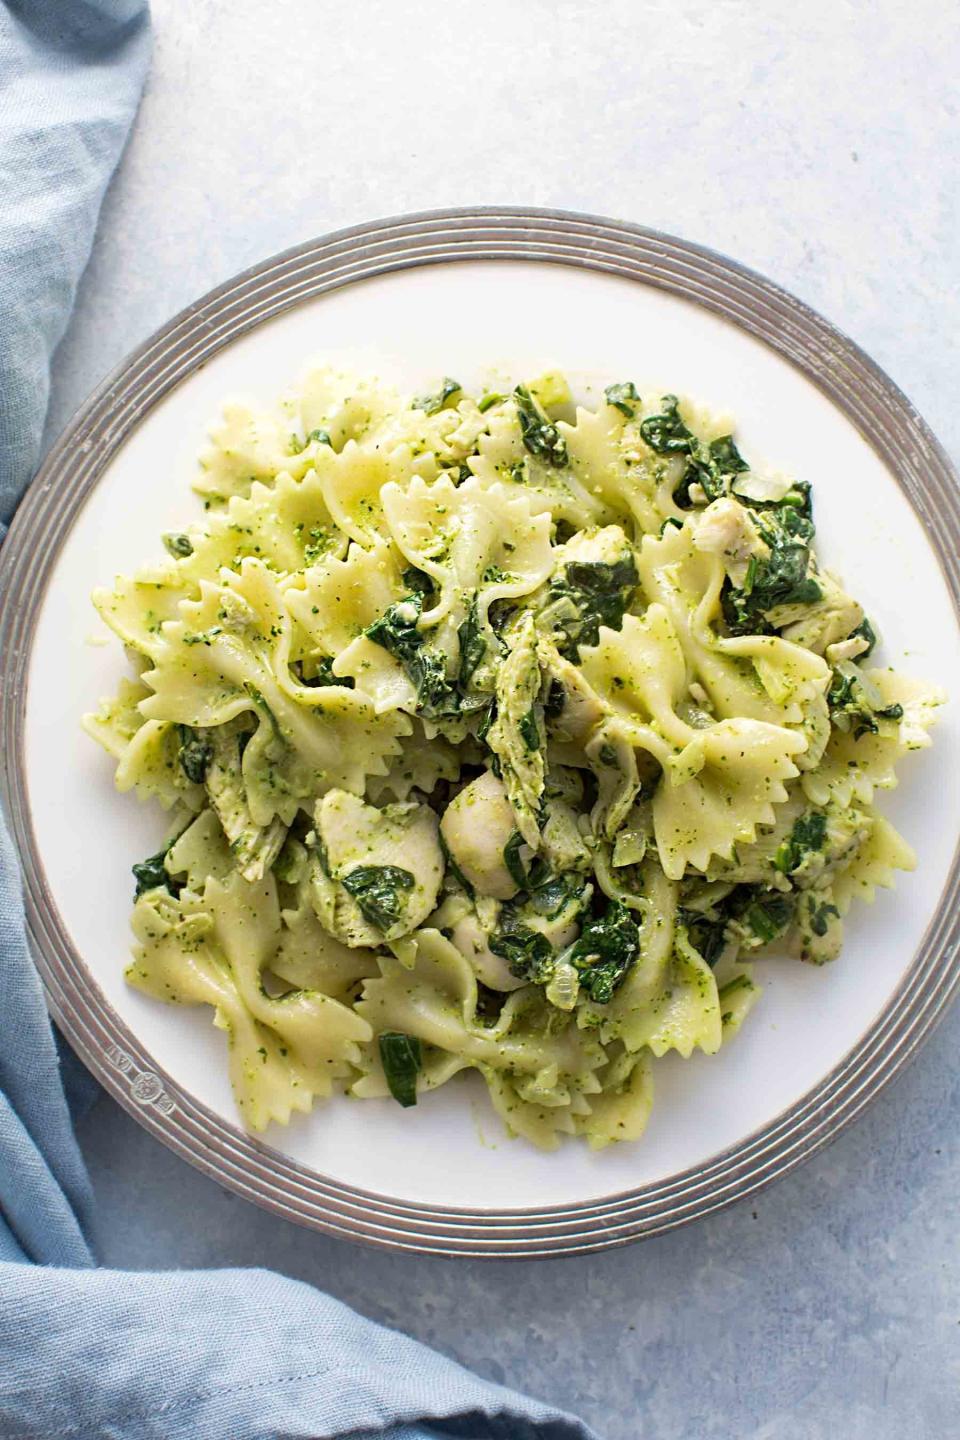 <strong>Get the <a href="http://www.simplyrecipes.com/recipes/chicken_florentine_pesto_pasta/" target="_blank">Chicken Florentine Pesto Pasta recipe</a>&nbsp;from Simply Recipes</strong>